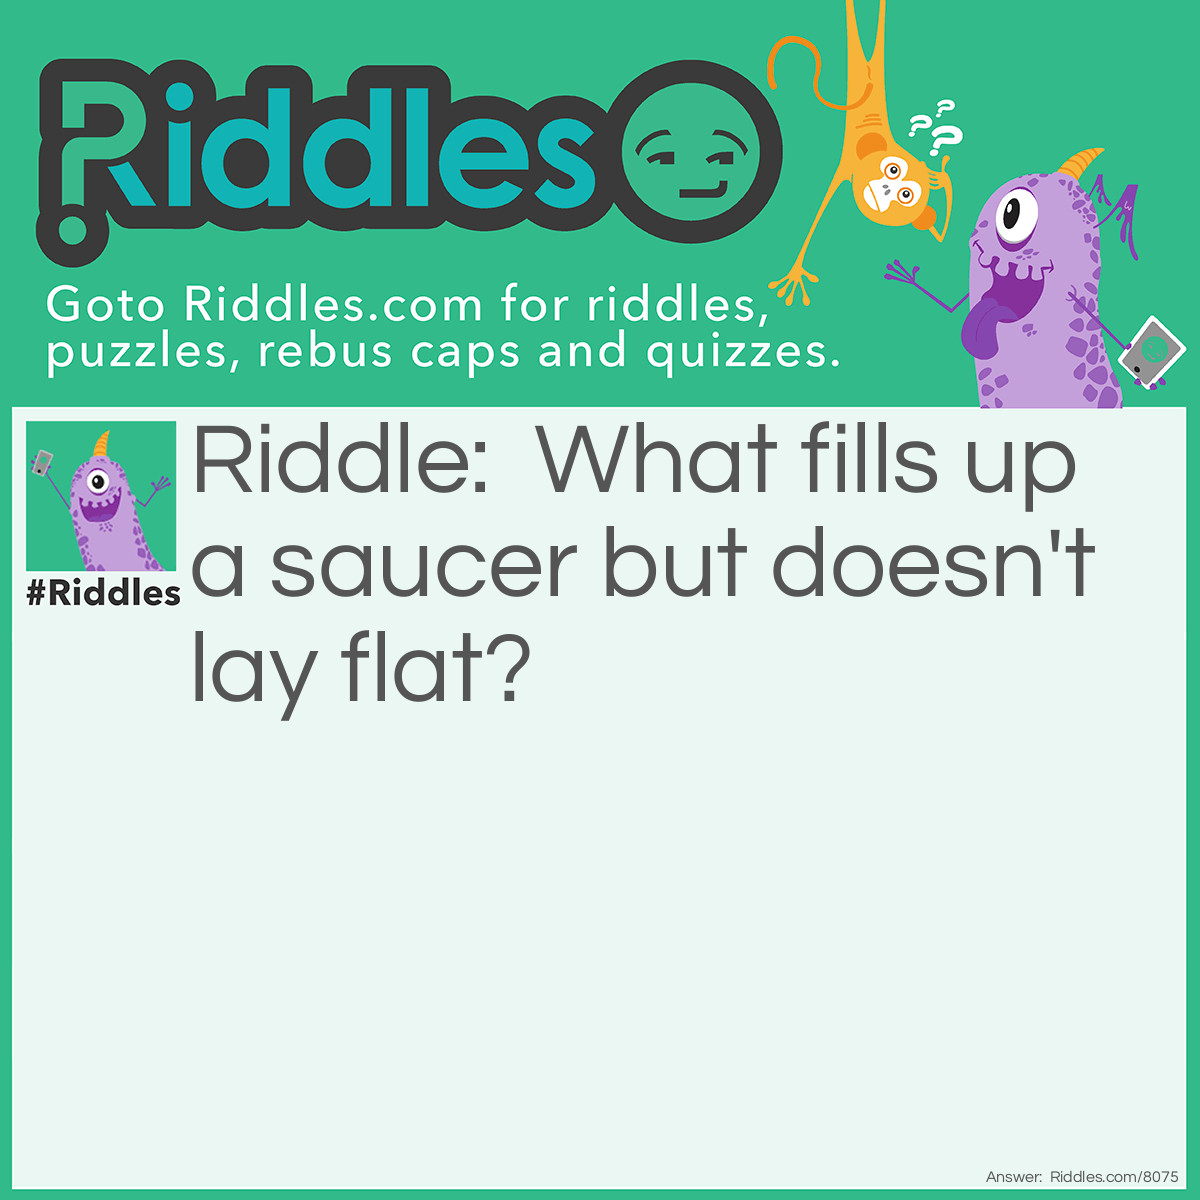 Riddle: What fills up a saucer but doesn't lay flat? Answer: A fat cat after it is done.